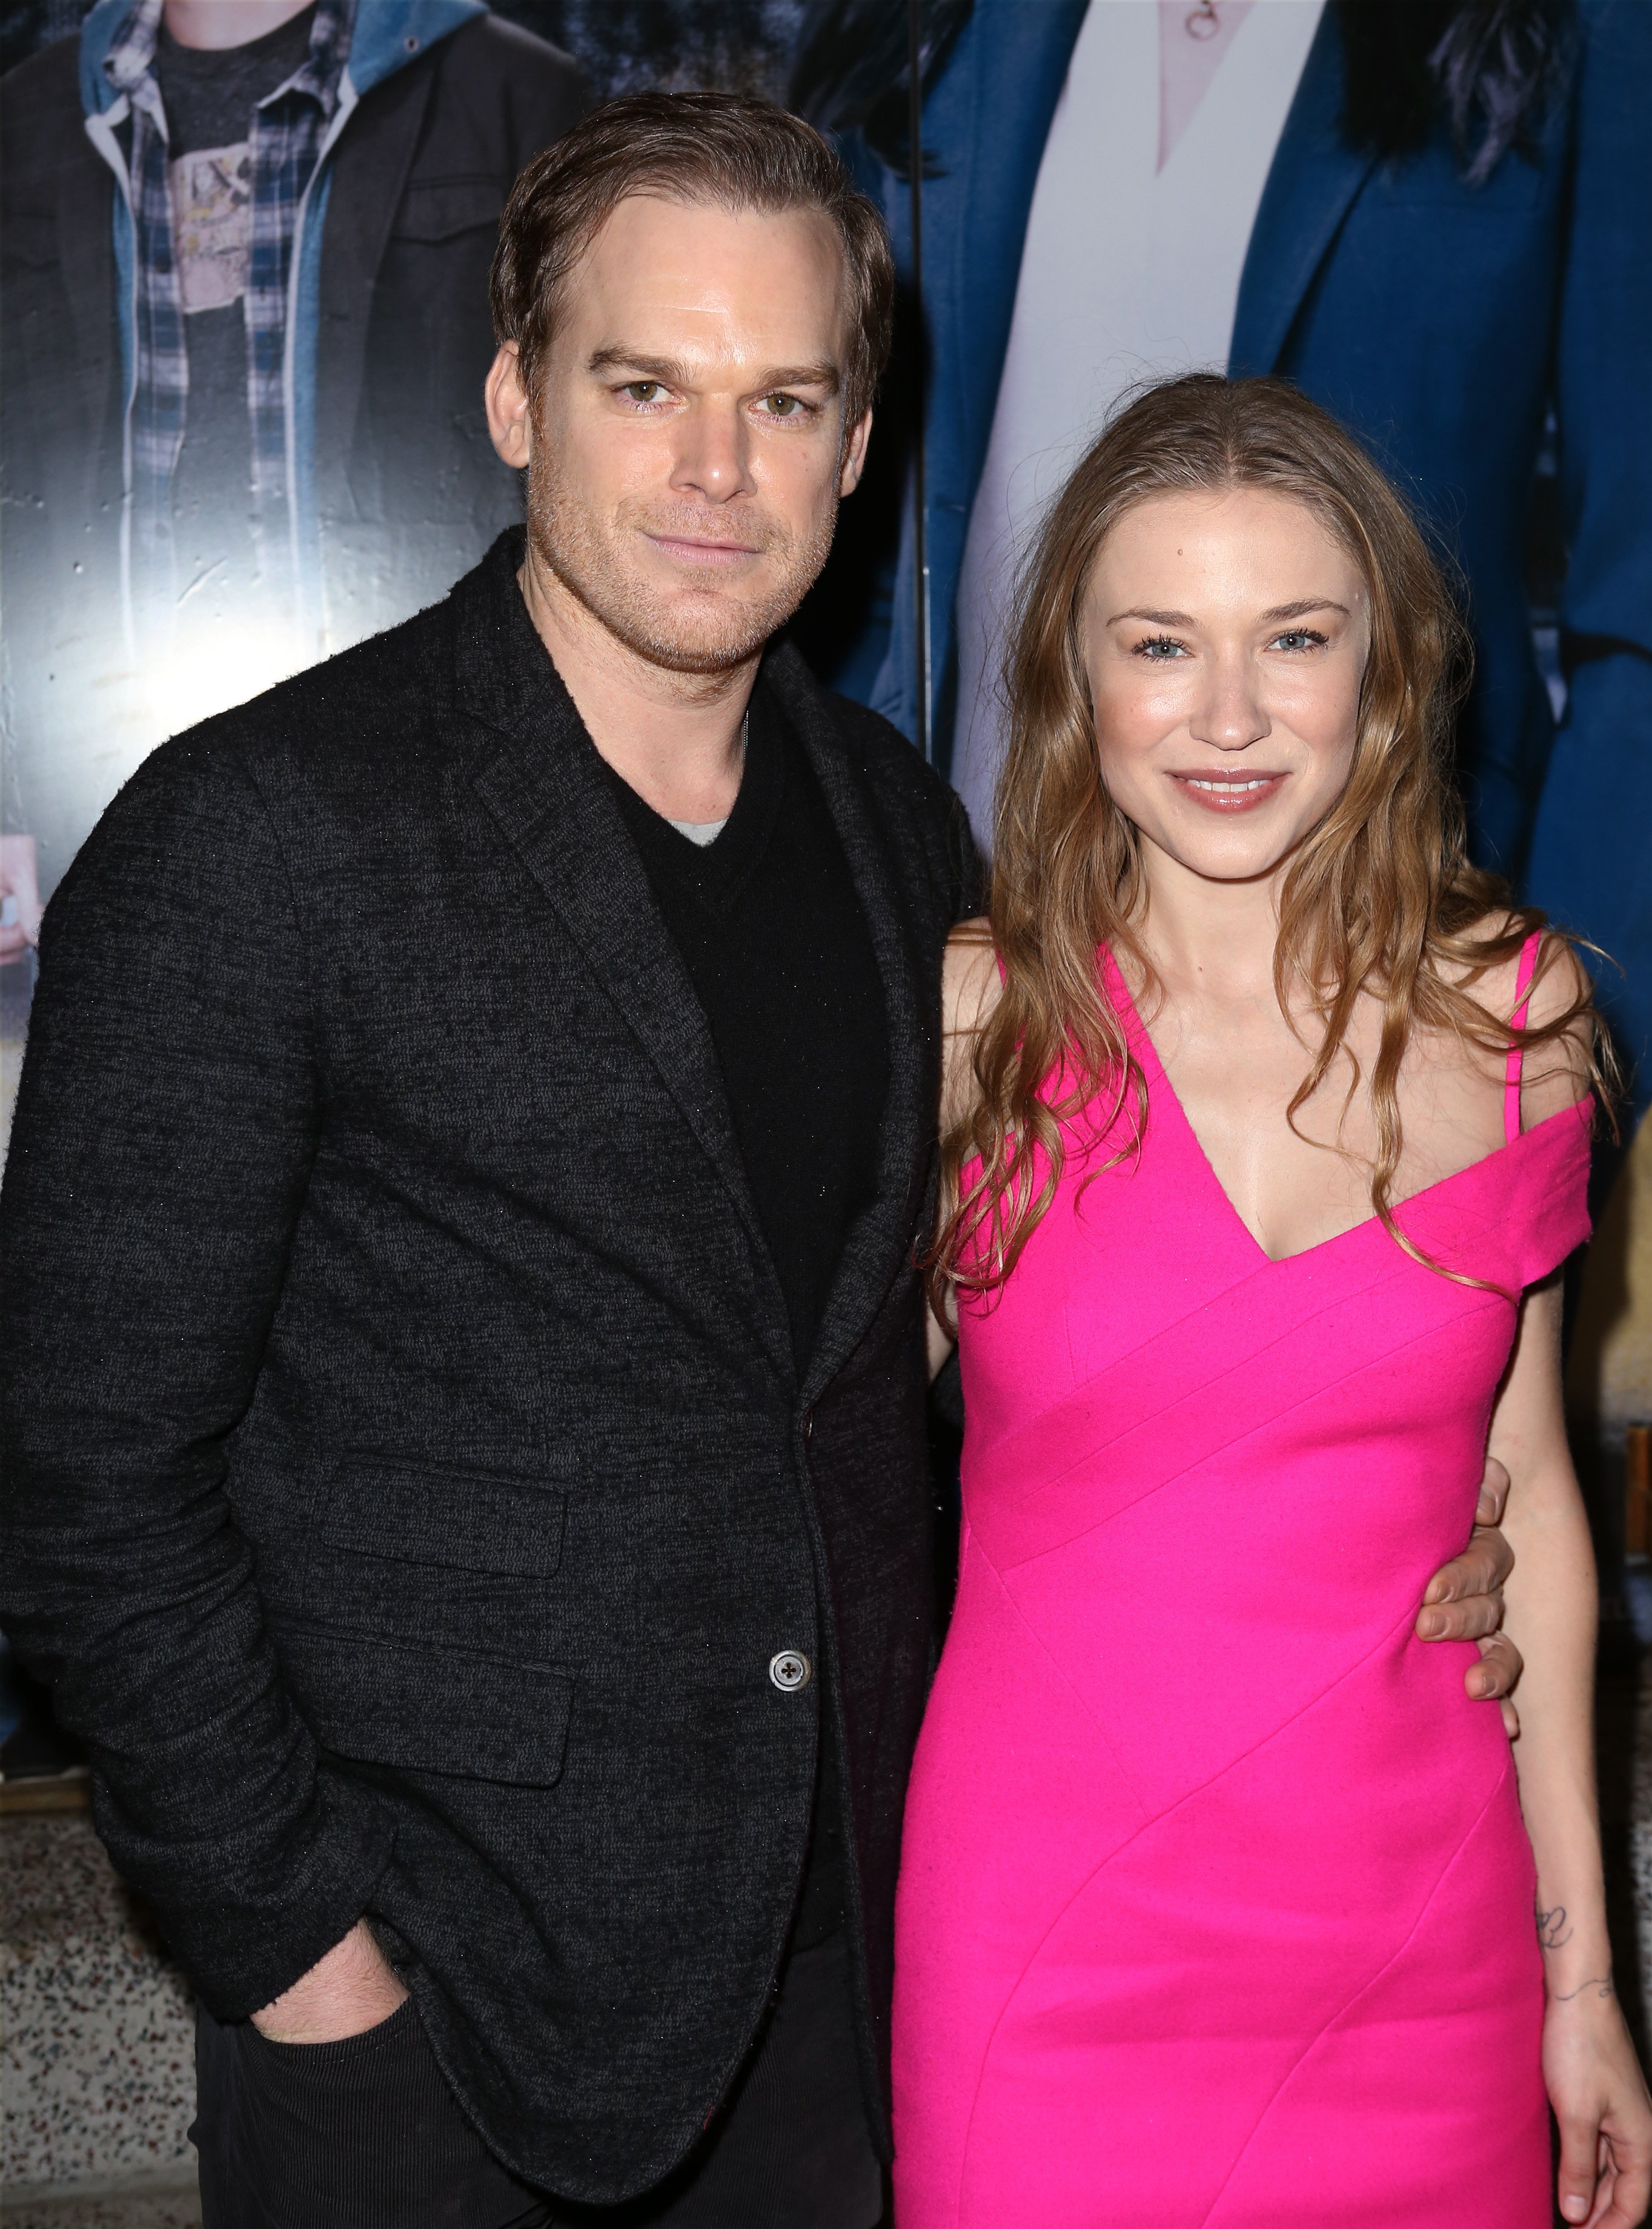 Michael C. Hall and Morgan MacGregor walk the red carpet at the "If/Then" Broadway Opening Night at Richard Rodgers Theatre on March 30, 2014 in New York City | Source: Getty Images